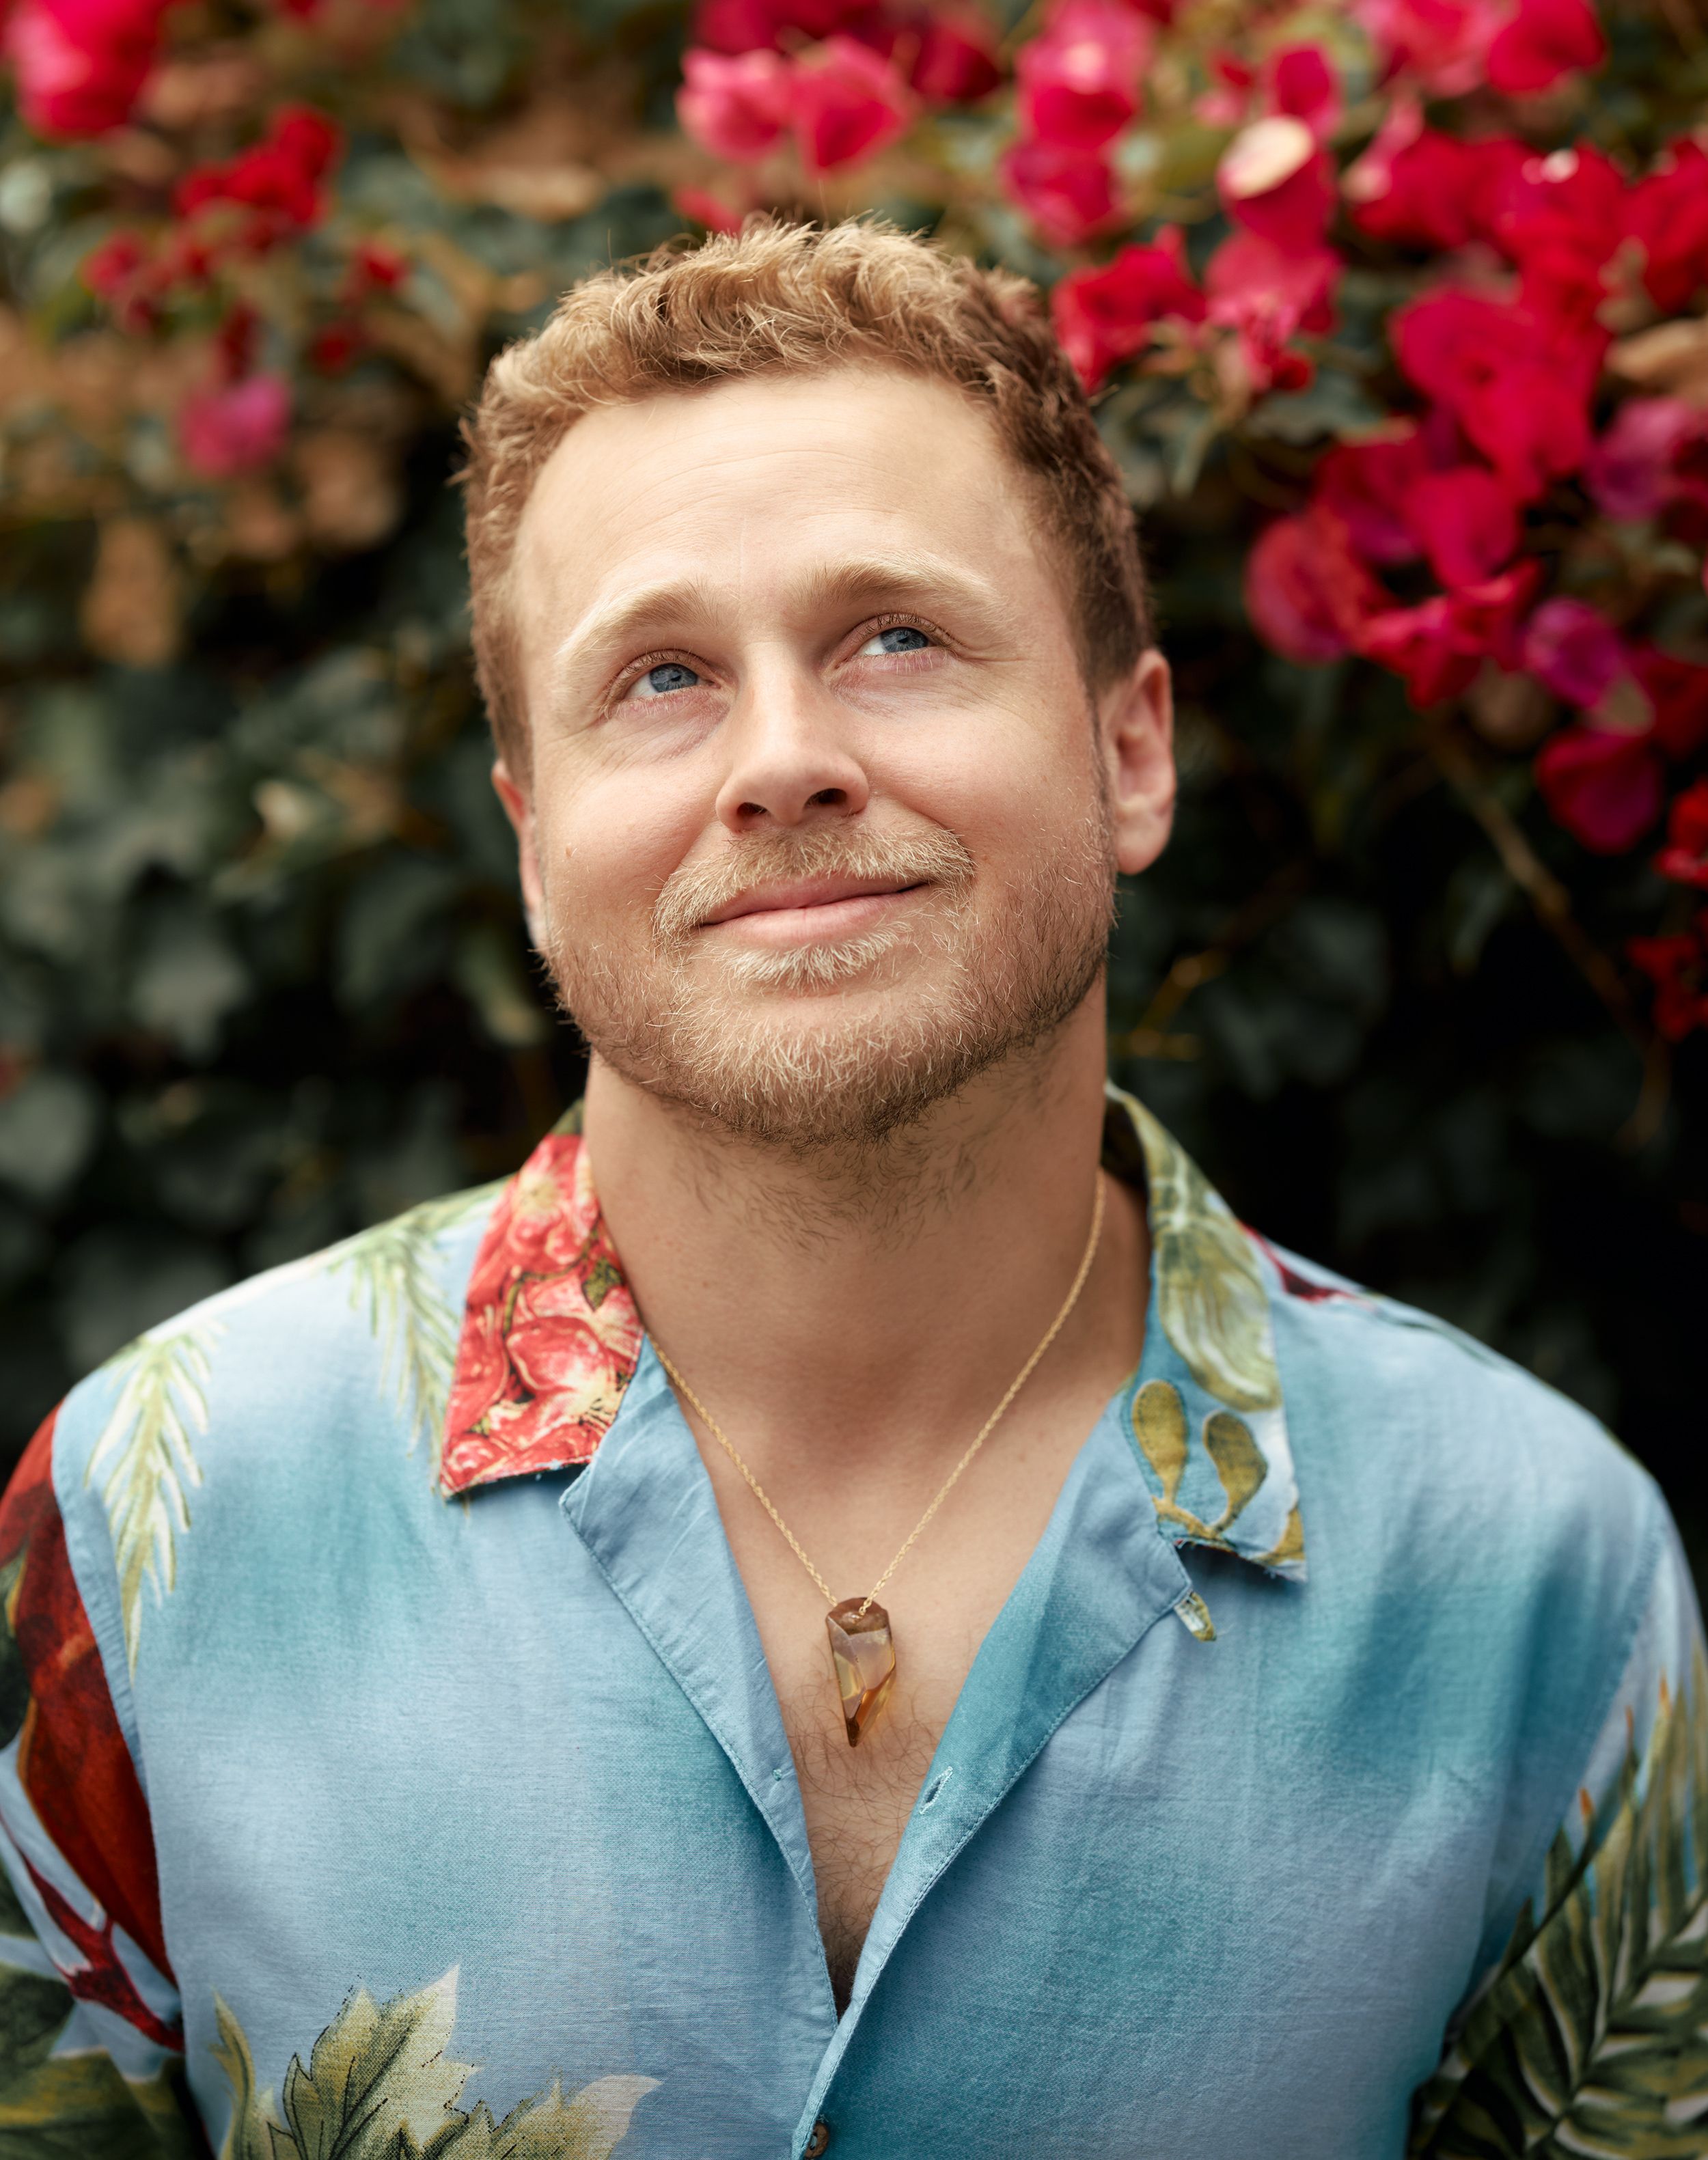 40 Unbelievable Facts About Spencer Pratt: Net Worth And Age